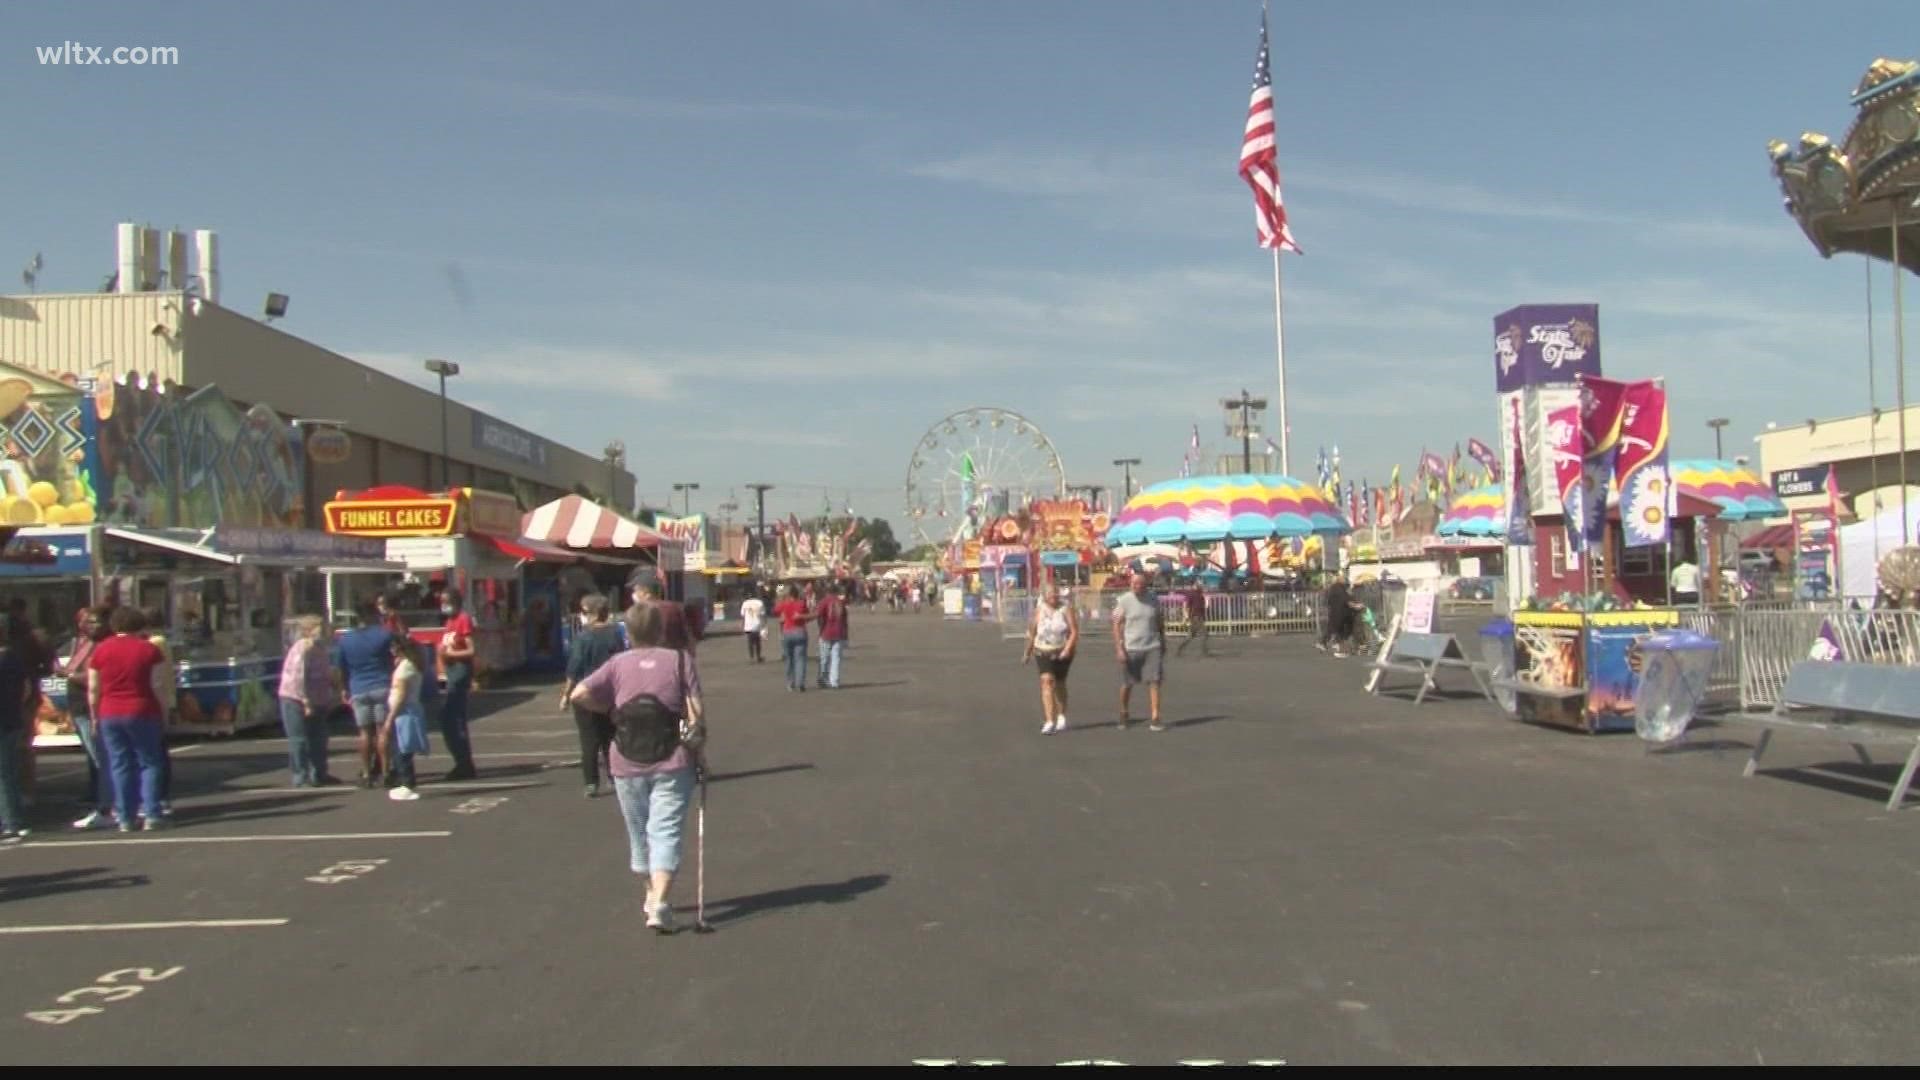 The South Carolina State Fair is welcoming back thousands of fans after having no in-person event in 2020.